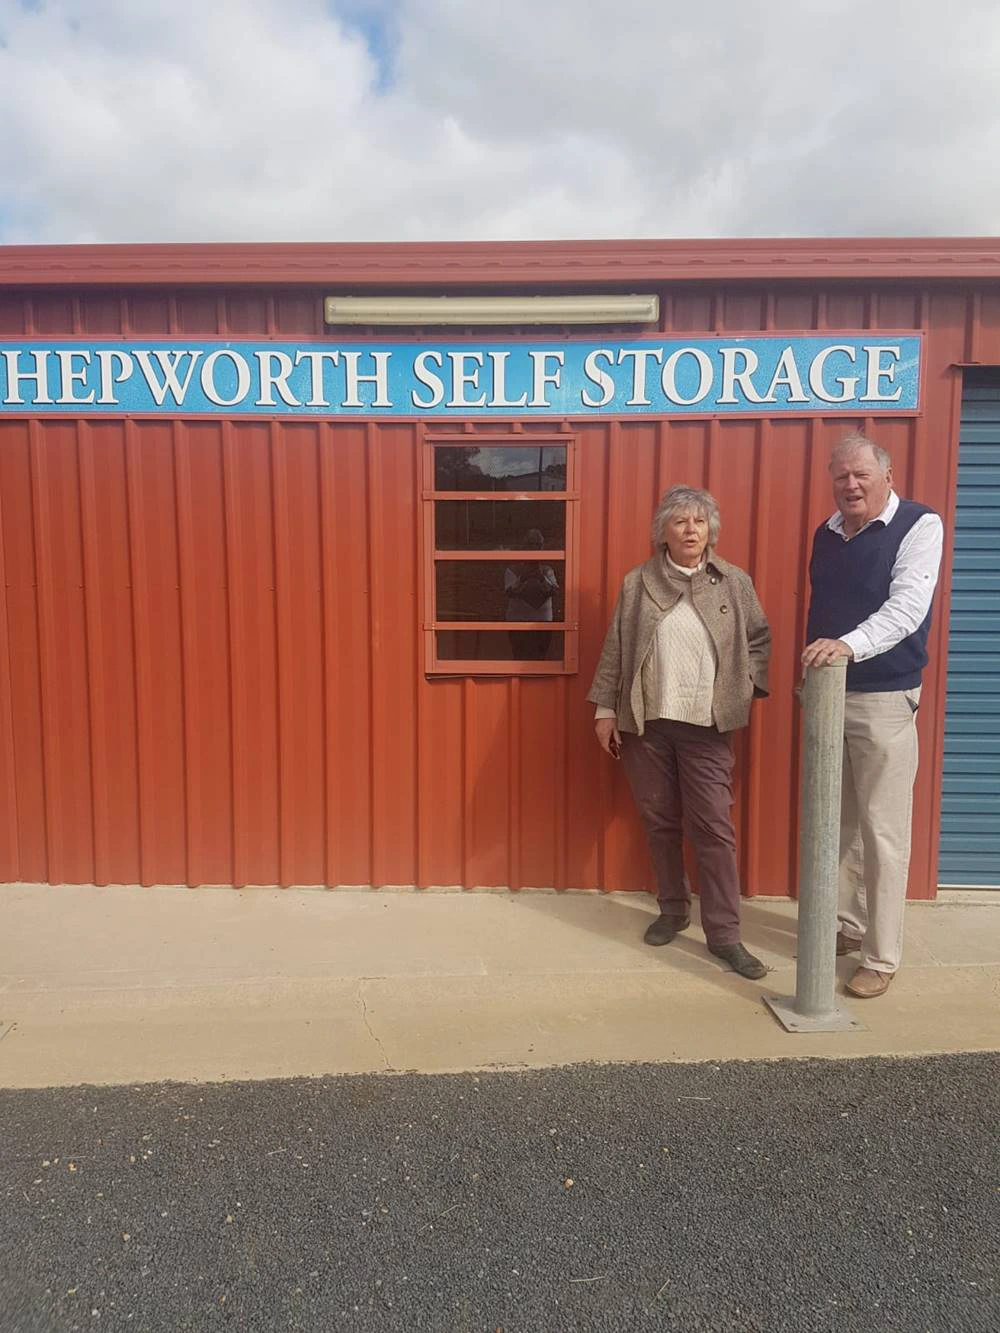 Hepworth Self Storage uses Storman Cloud to connect across continents